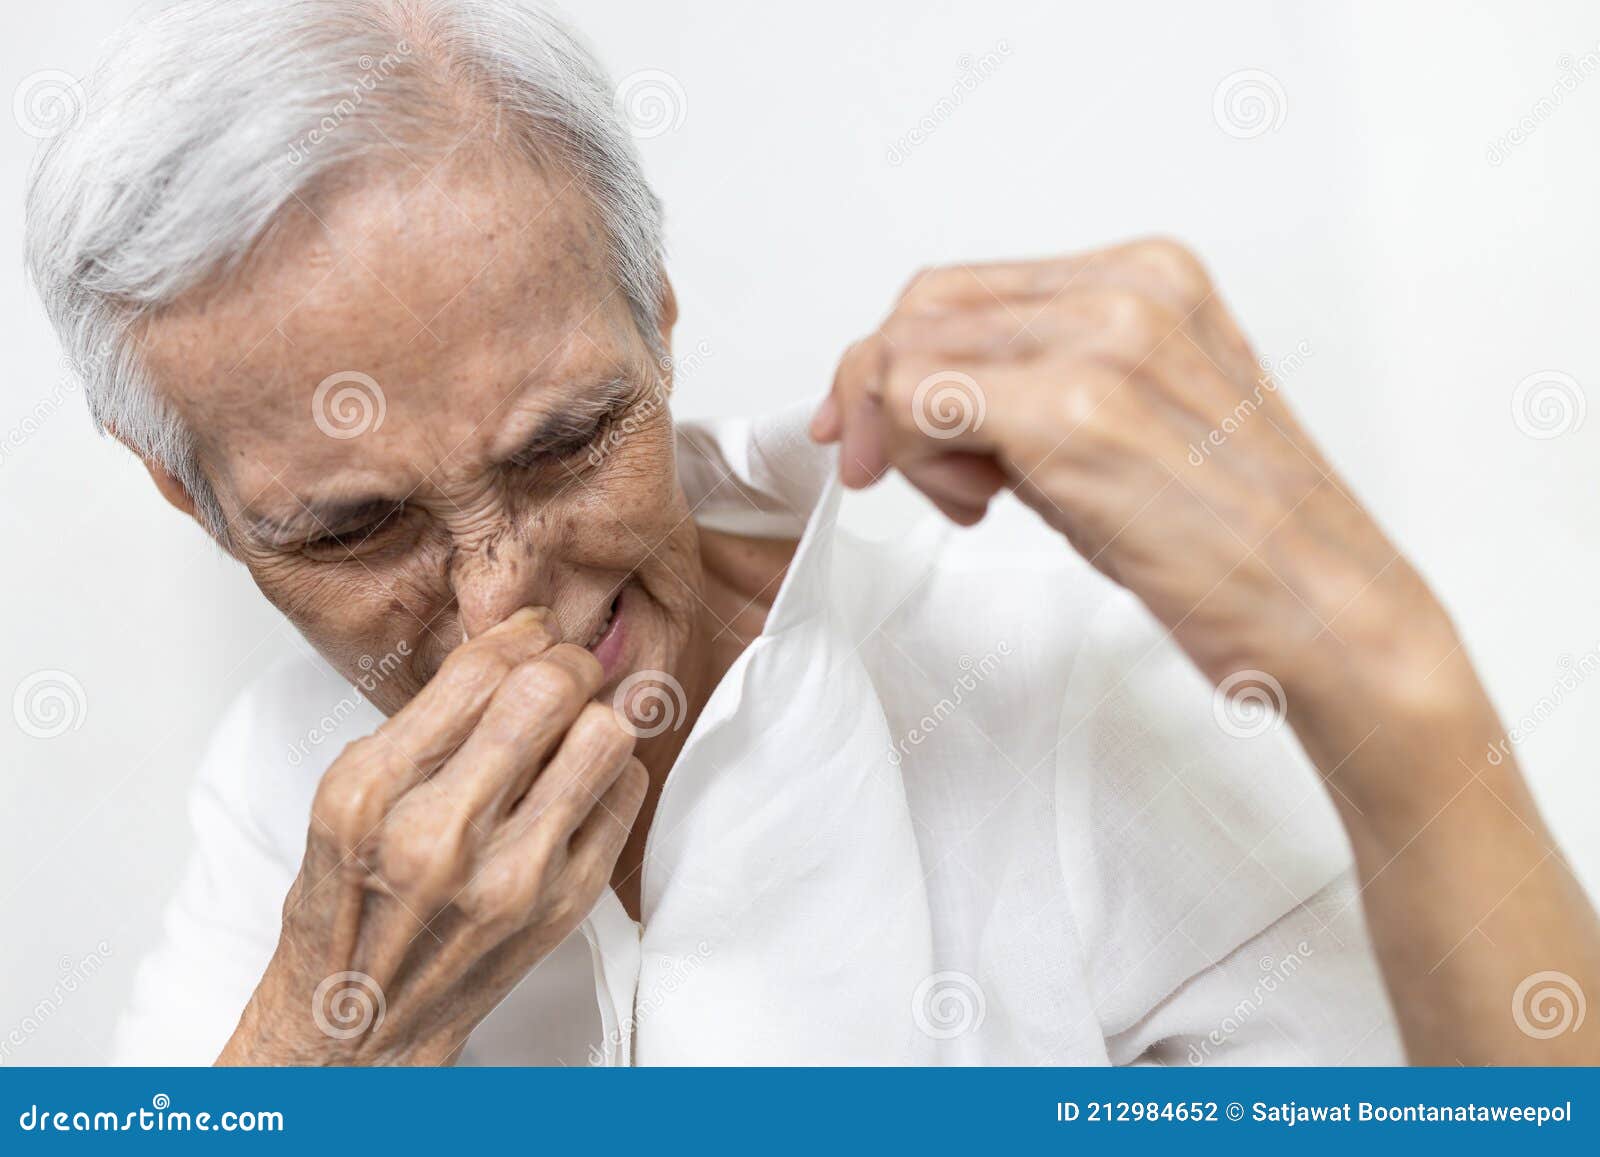 old elderly people is sniffing shirt smell moldy,closing nose with the disgusting,intolerable smell,dirty laundry,unclean washing,